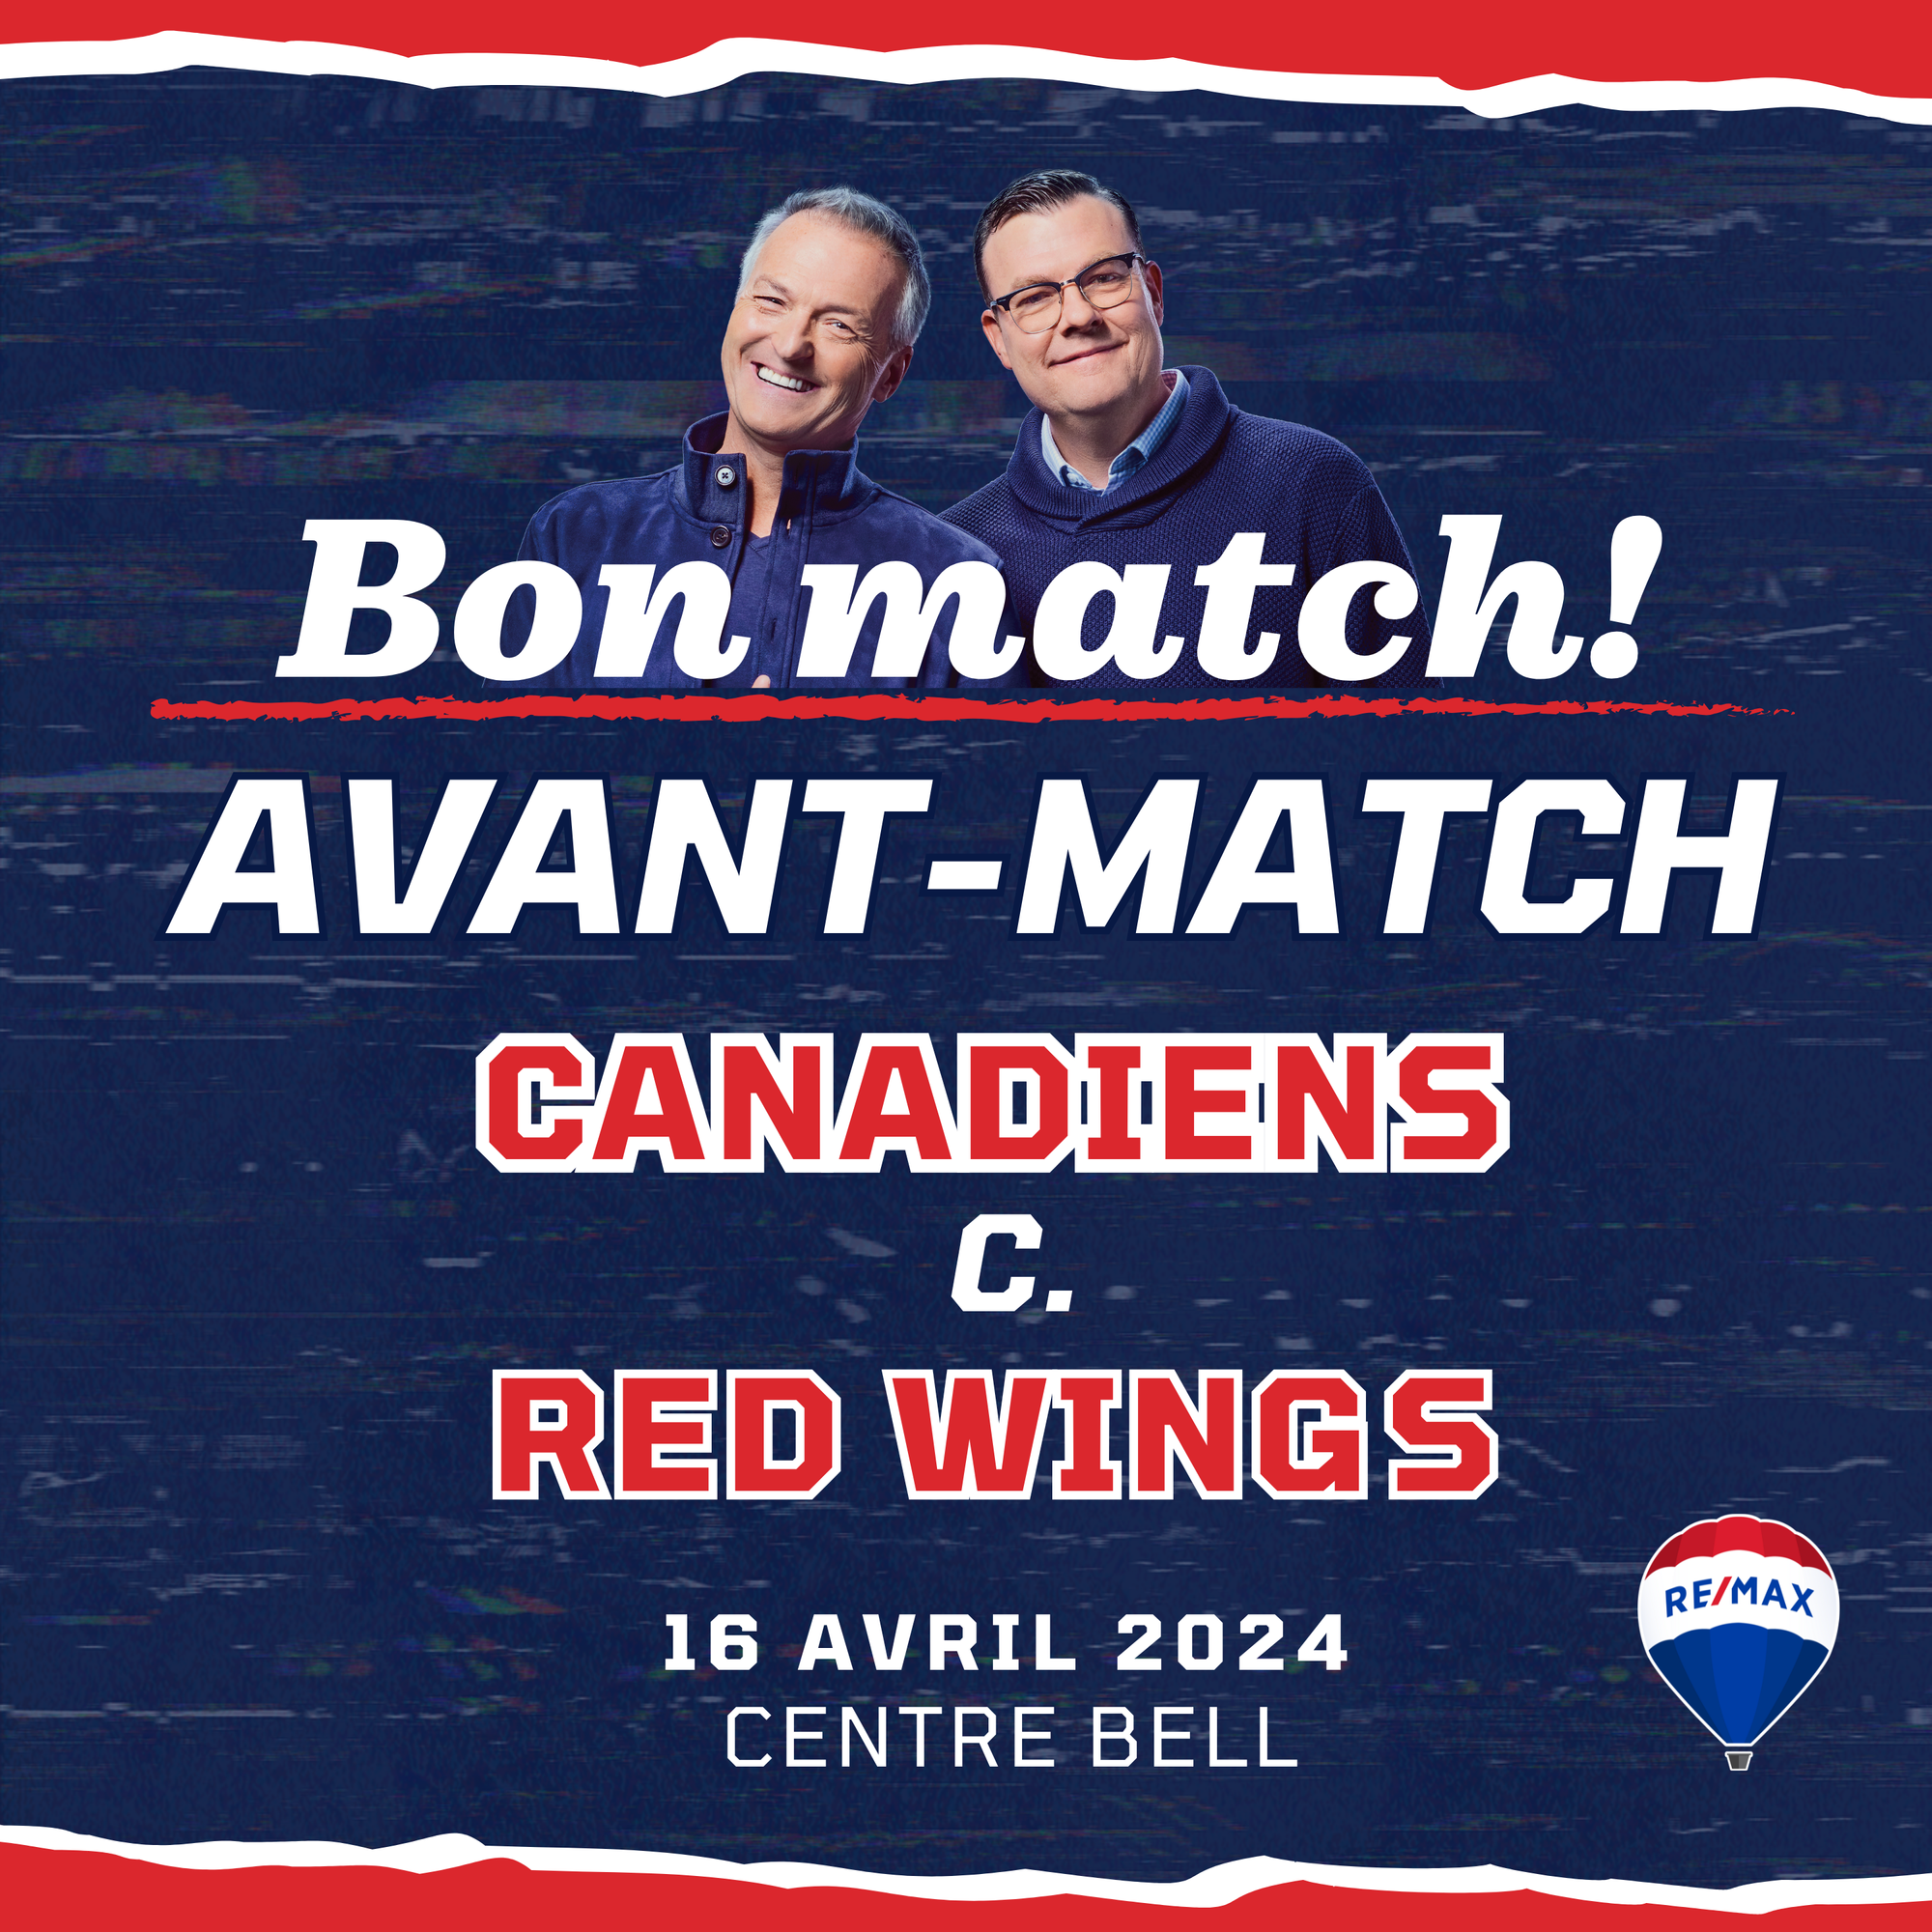 Avant-match | Canadiens c. Red Wings | 16/04/24